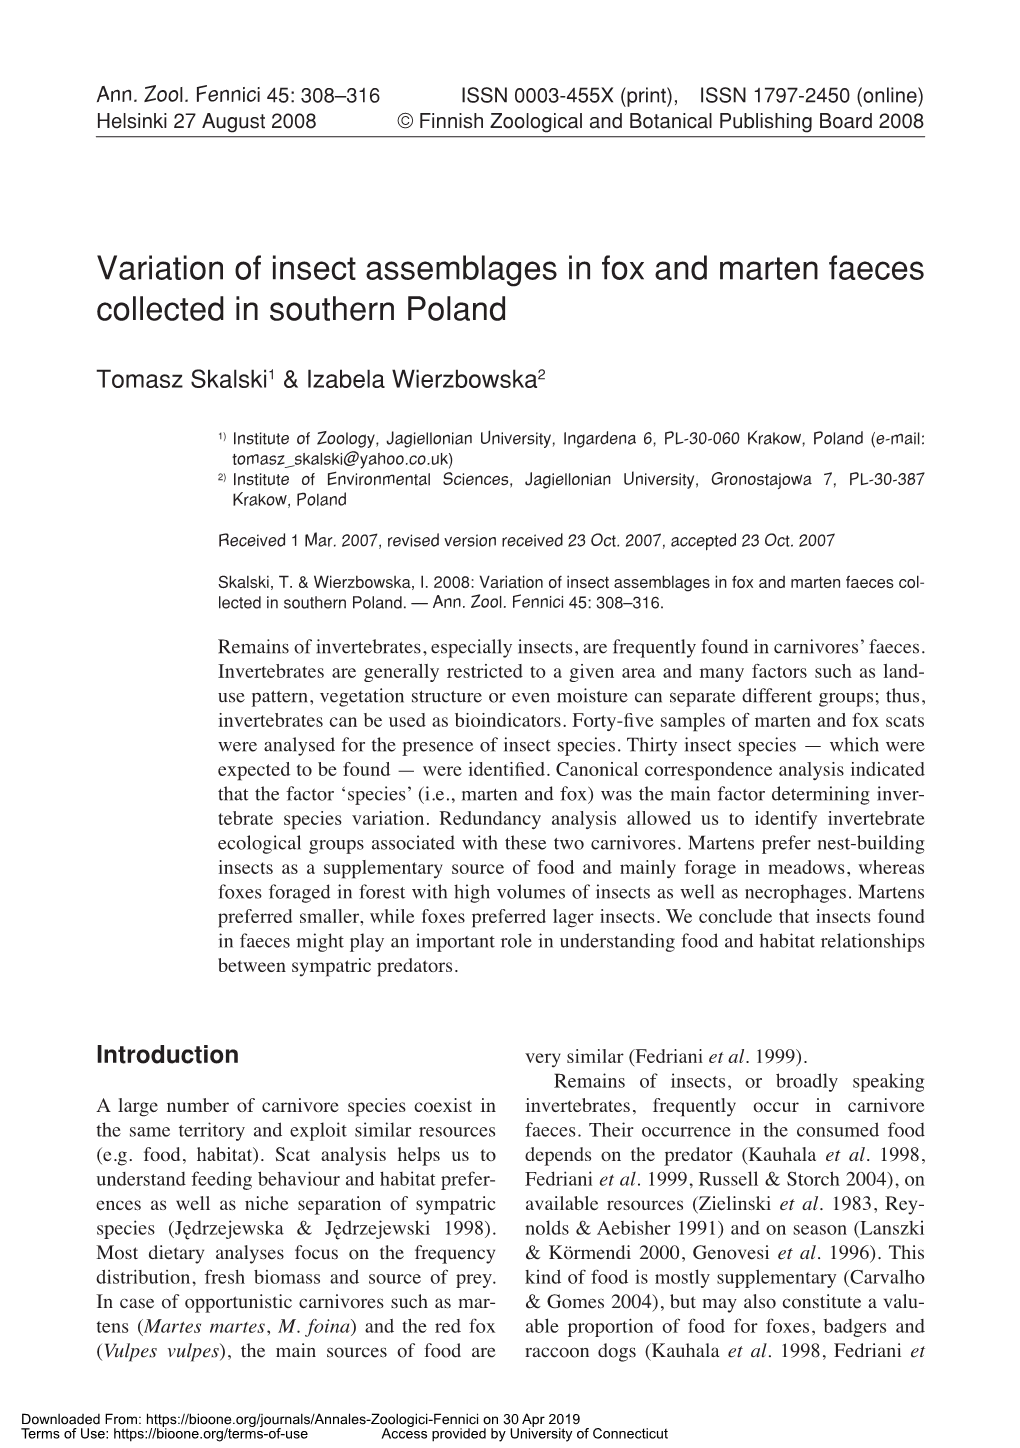 Variation of Insect Assemblages in Fox and Marten Faeces Collected in Southern Poland